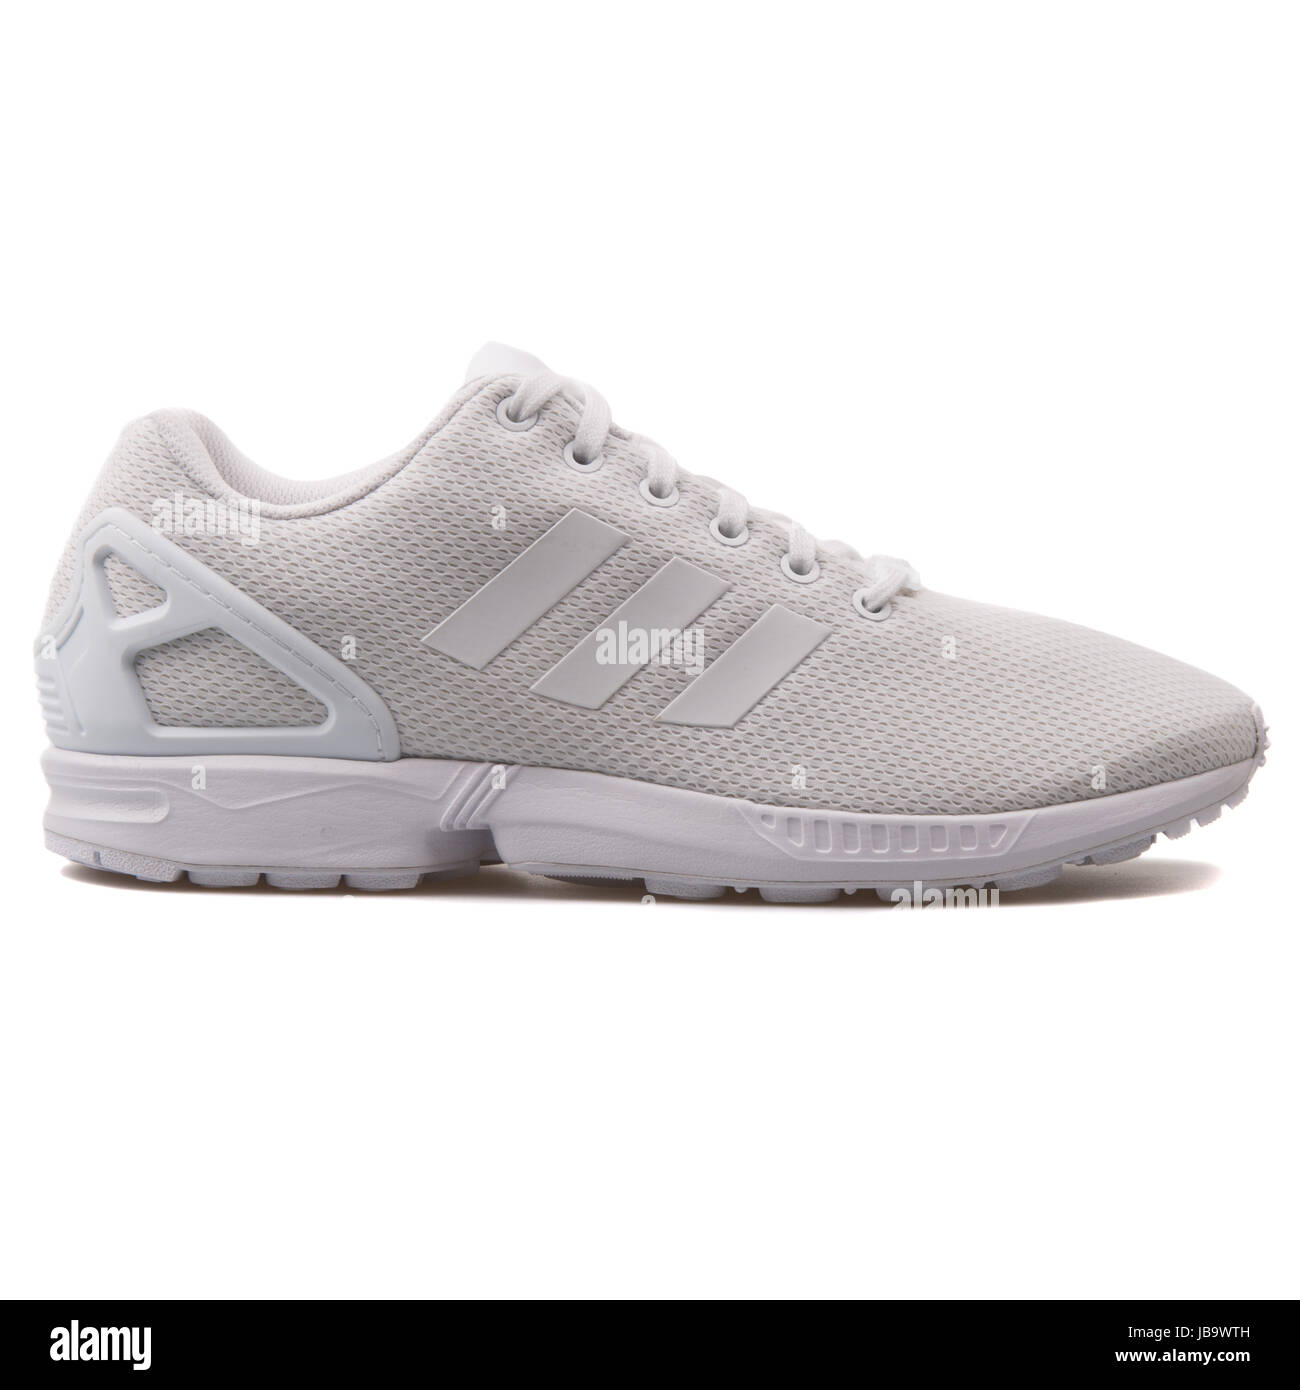 Adidas ZX Flux White Mesh Men's Running Shoes - AF6403 Stock Photo - Alamy